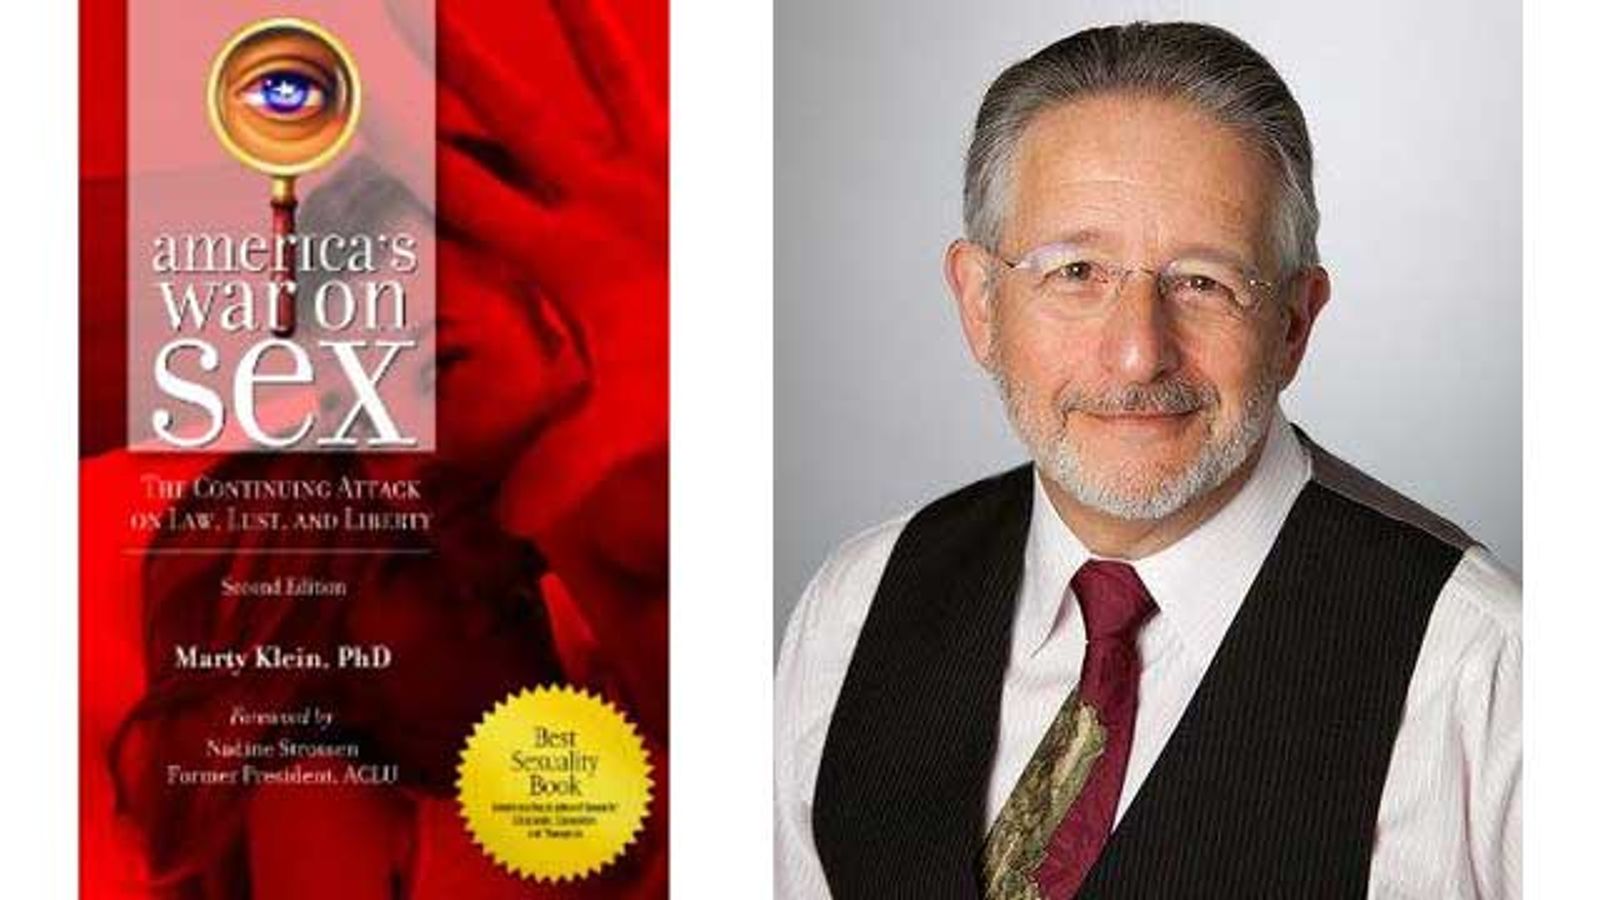 Hear Dr. Marty Klein Talk About 'America's War on Sex' Sunday